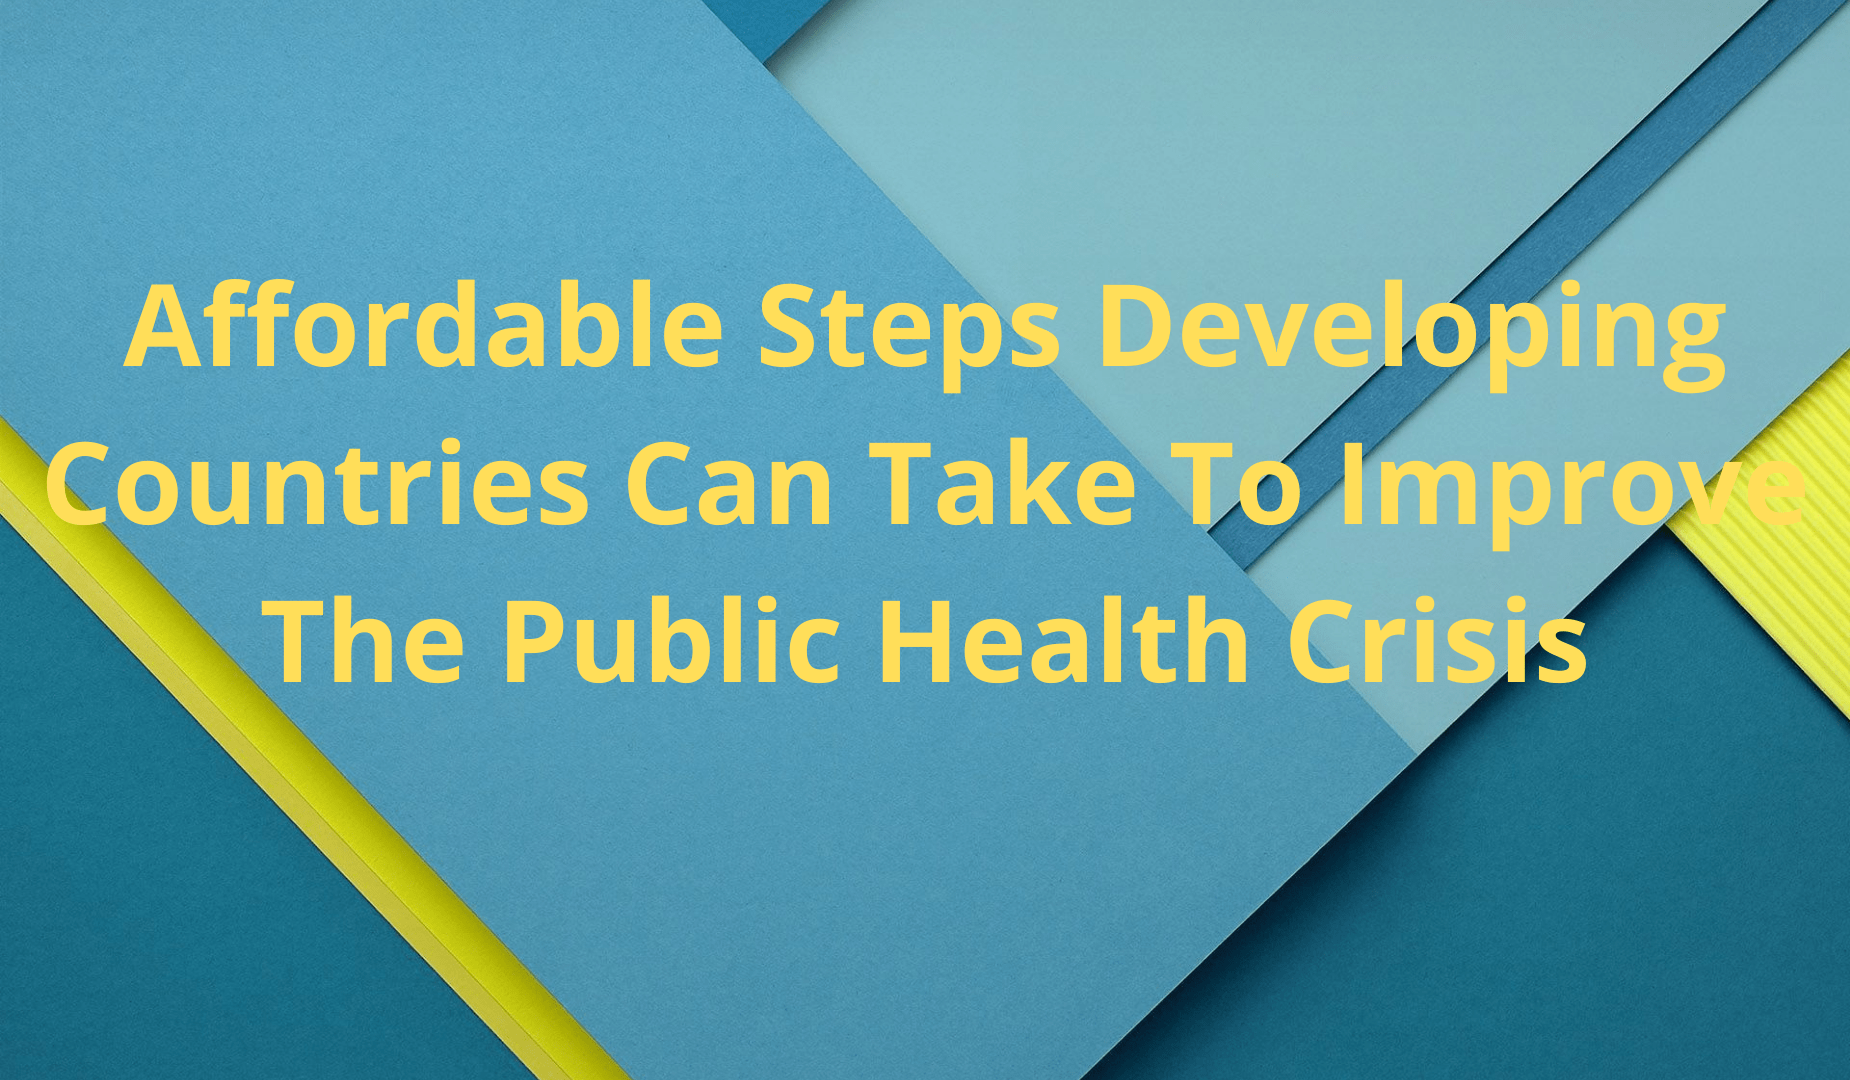 Affordable Steps Developing Countries Can Take To Improve The Public Health Crisis